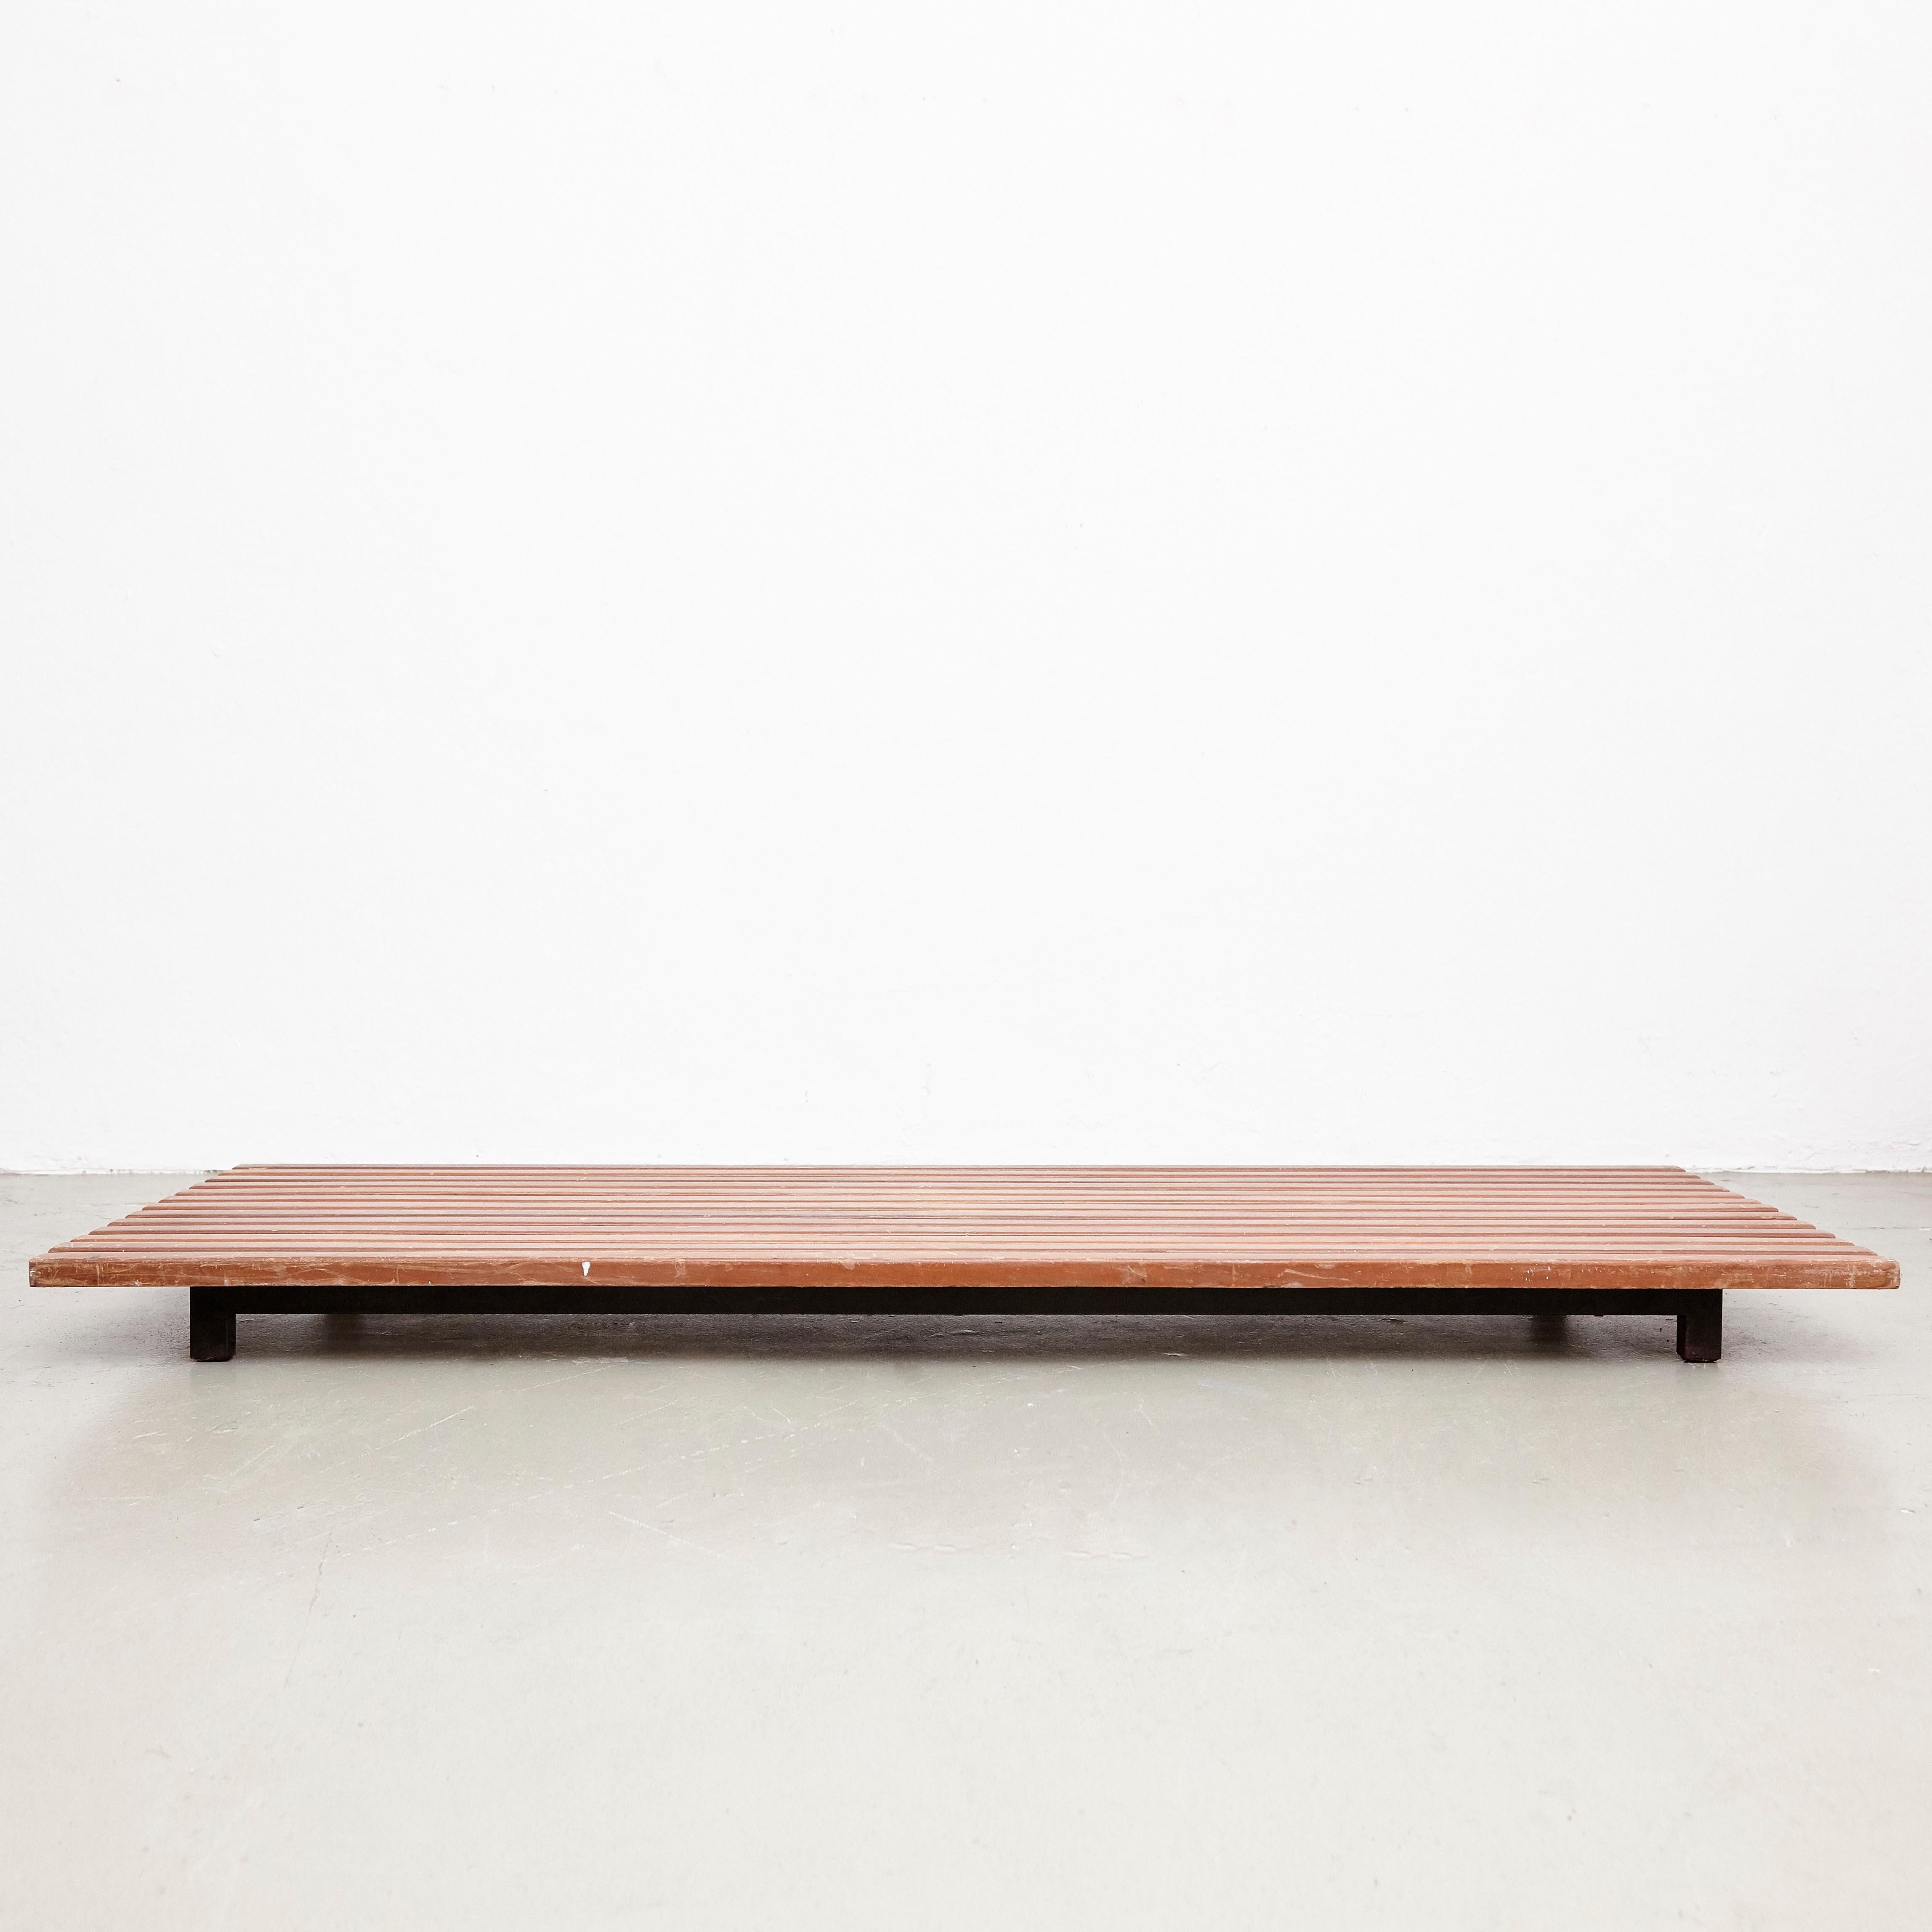 Low bench designed by Charlotte Perriand, circa 1950.
Manufactured by Steph Simon (France), circa 1950.
Wood, lacquered metal frame and legs.

Provenance: Cansado, Mauritania (Africa).

In original condition, with minor wear consistent with